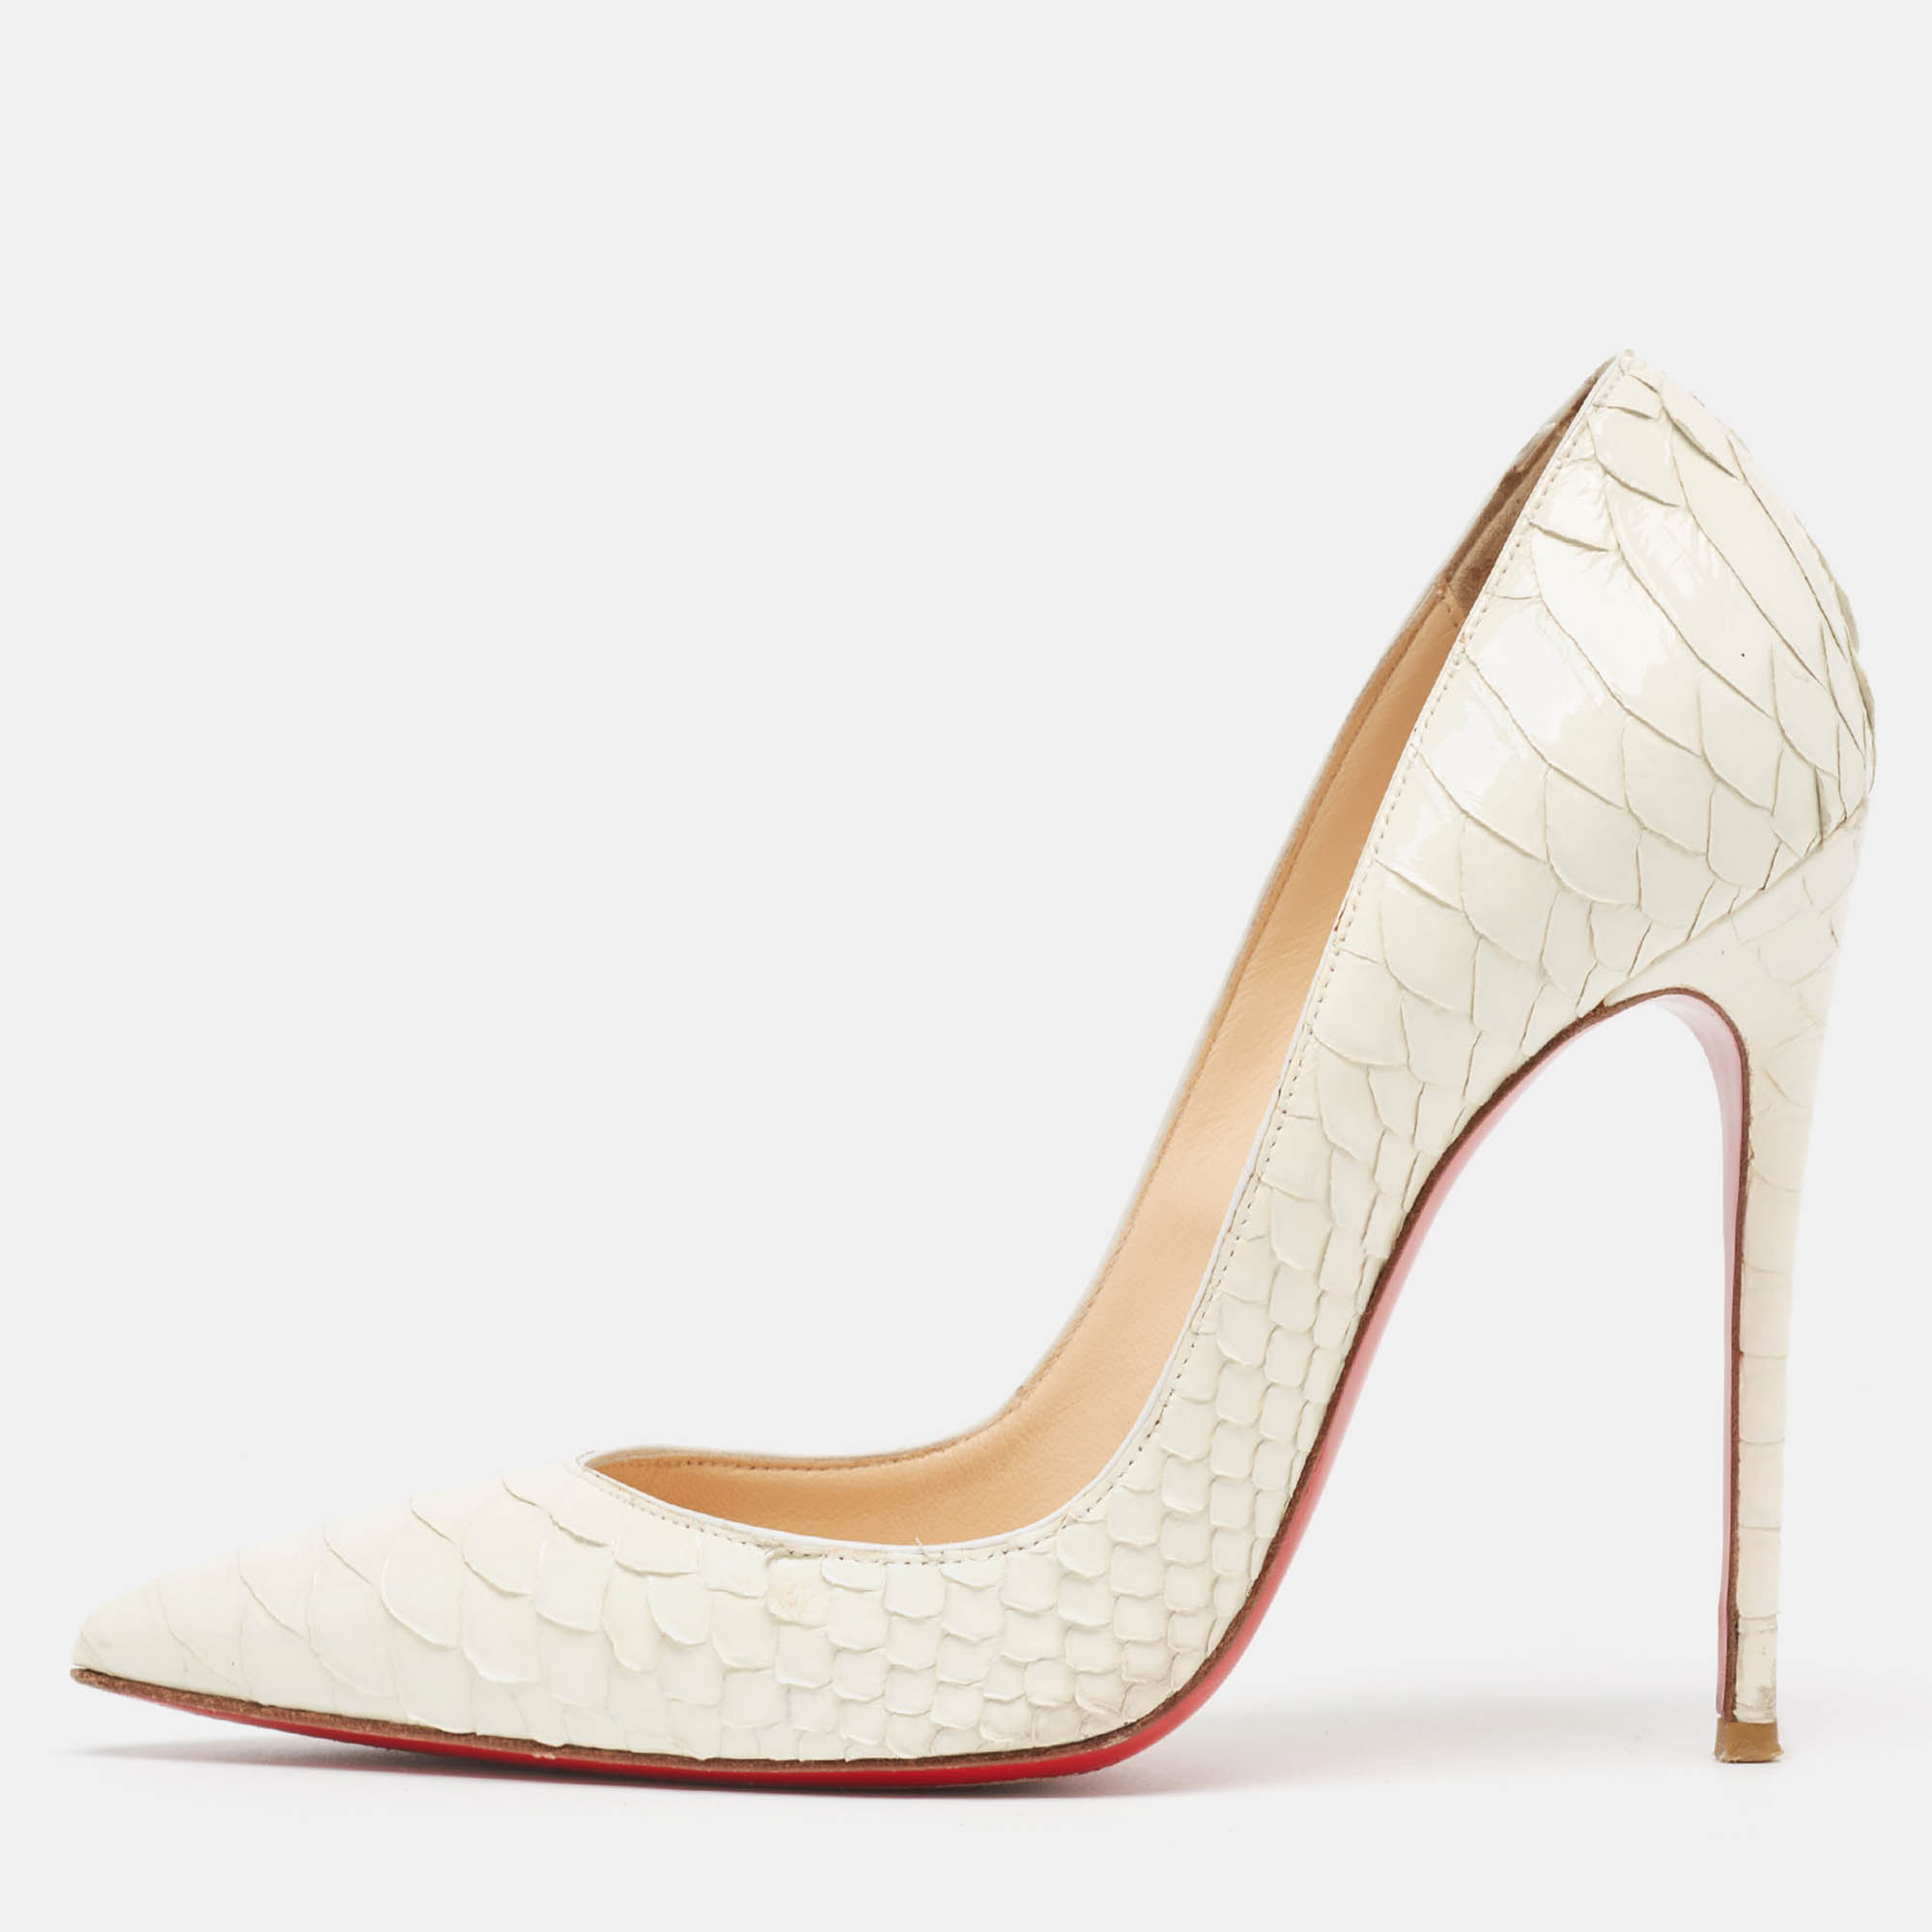 Pre-owned Christian Louboutin Cream Python Leather So Kate Pumps Size 36.5